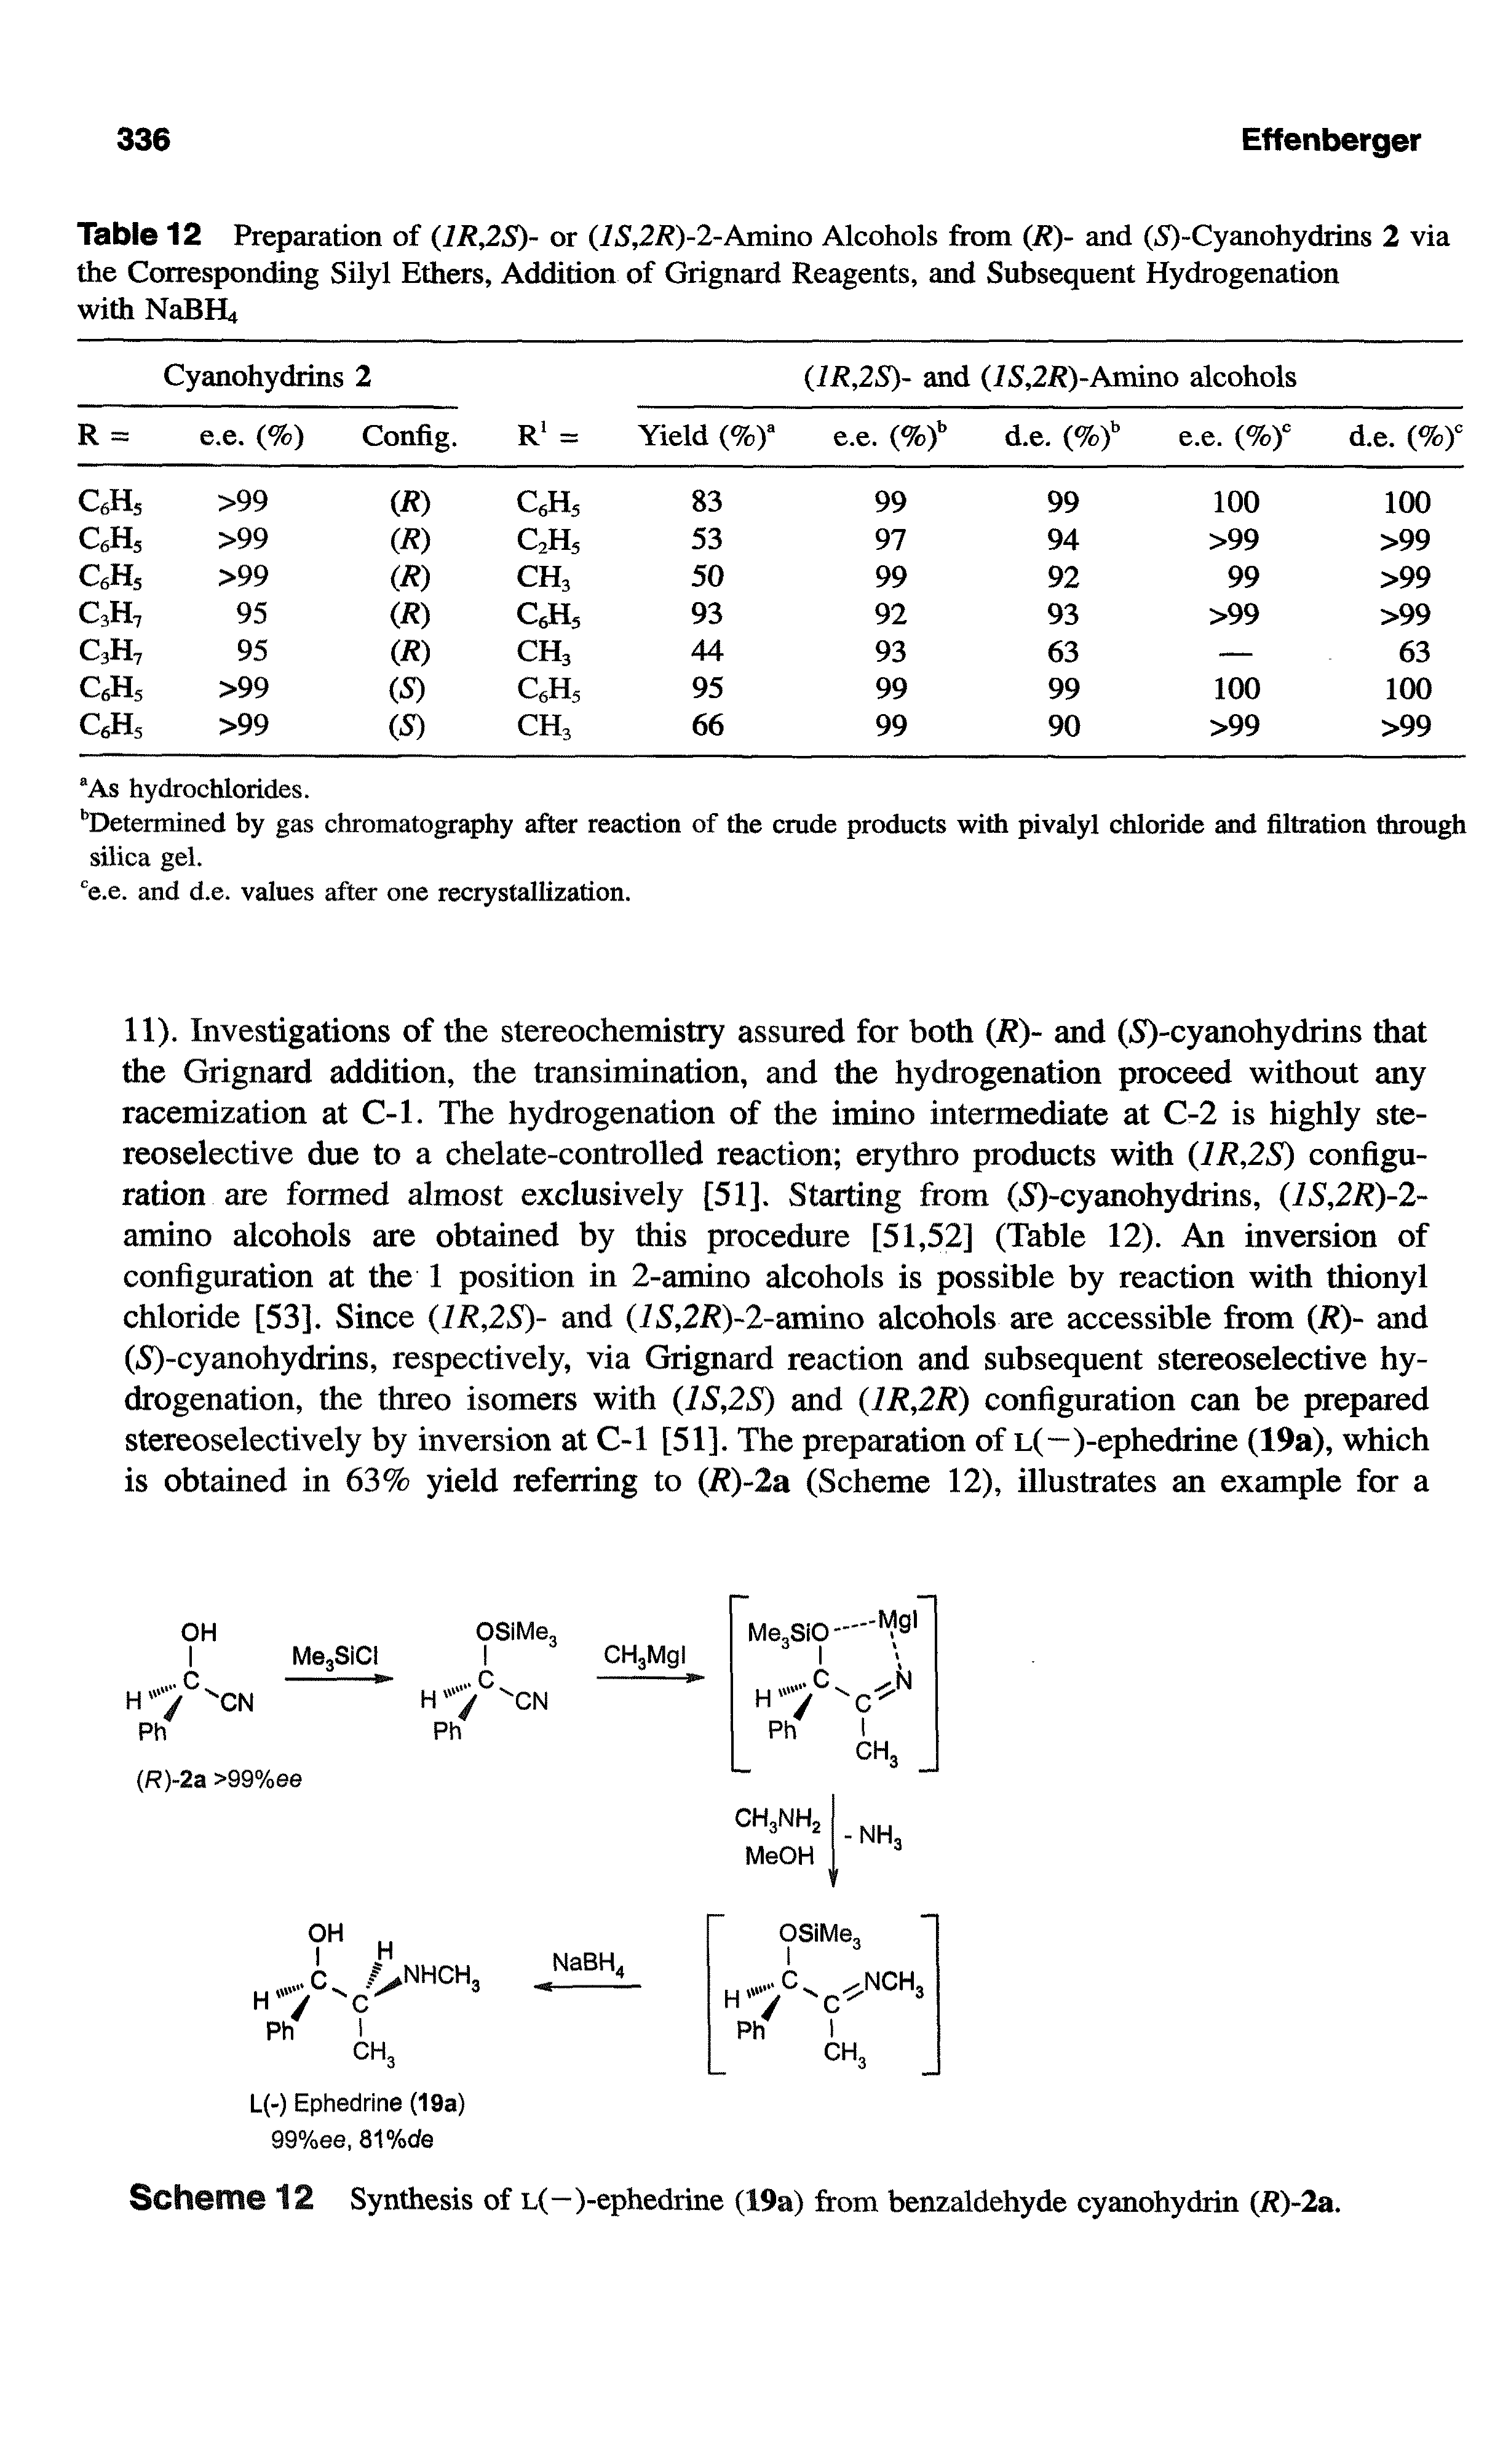 Table 12 Preparation of (1R,2S)- or (i5,2/f)-2-Amino Alcohols from (R)- and (5)-Cyanohydrins 2 via the Corresponding Silyl Ethers, Addition of Grignard Reagents, and Subsequent Hydrogenation with NaBHLj...